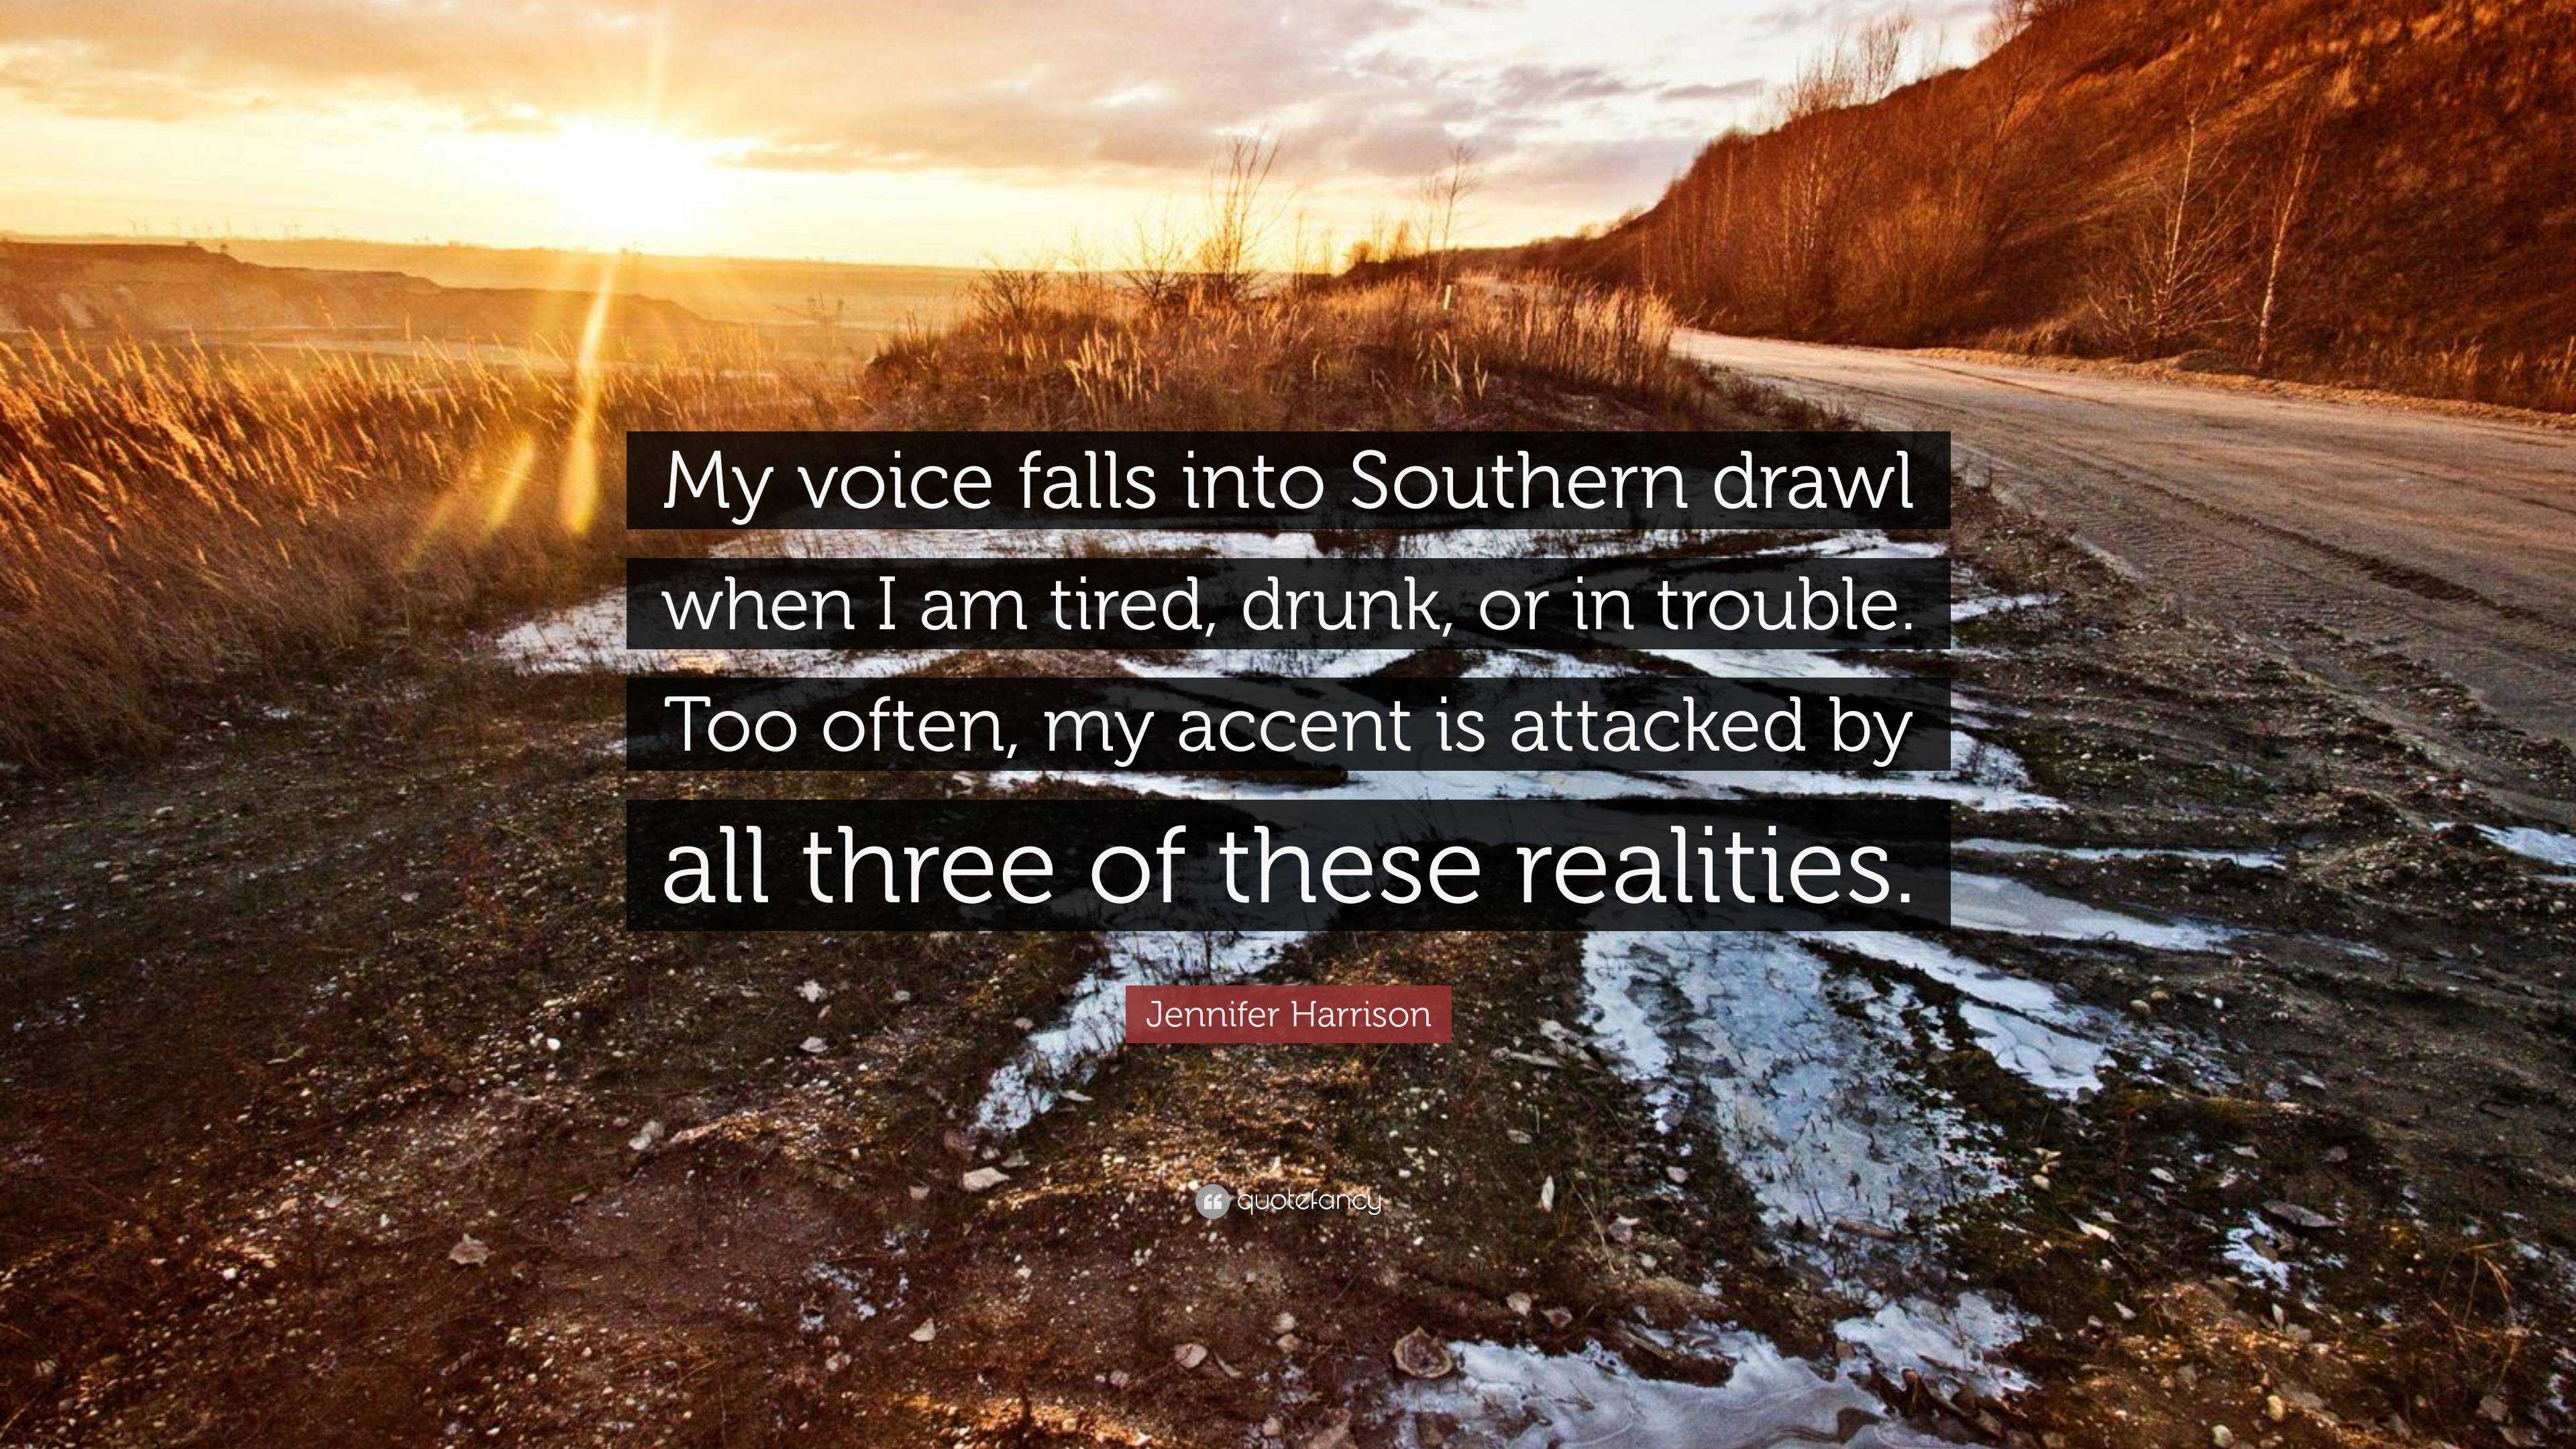 Jennifer Harrison Quote: “My voice falls into Southern drawl when